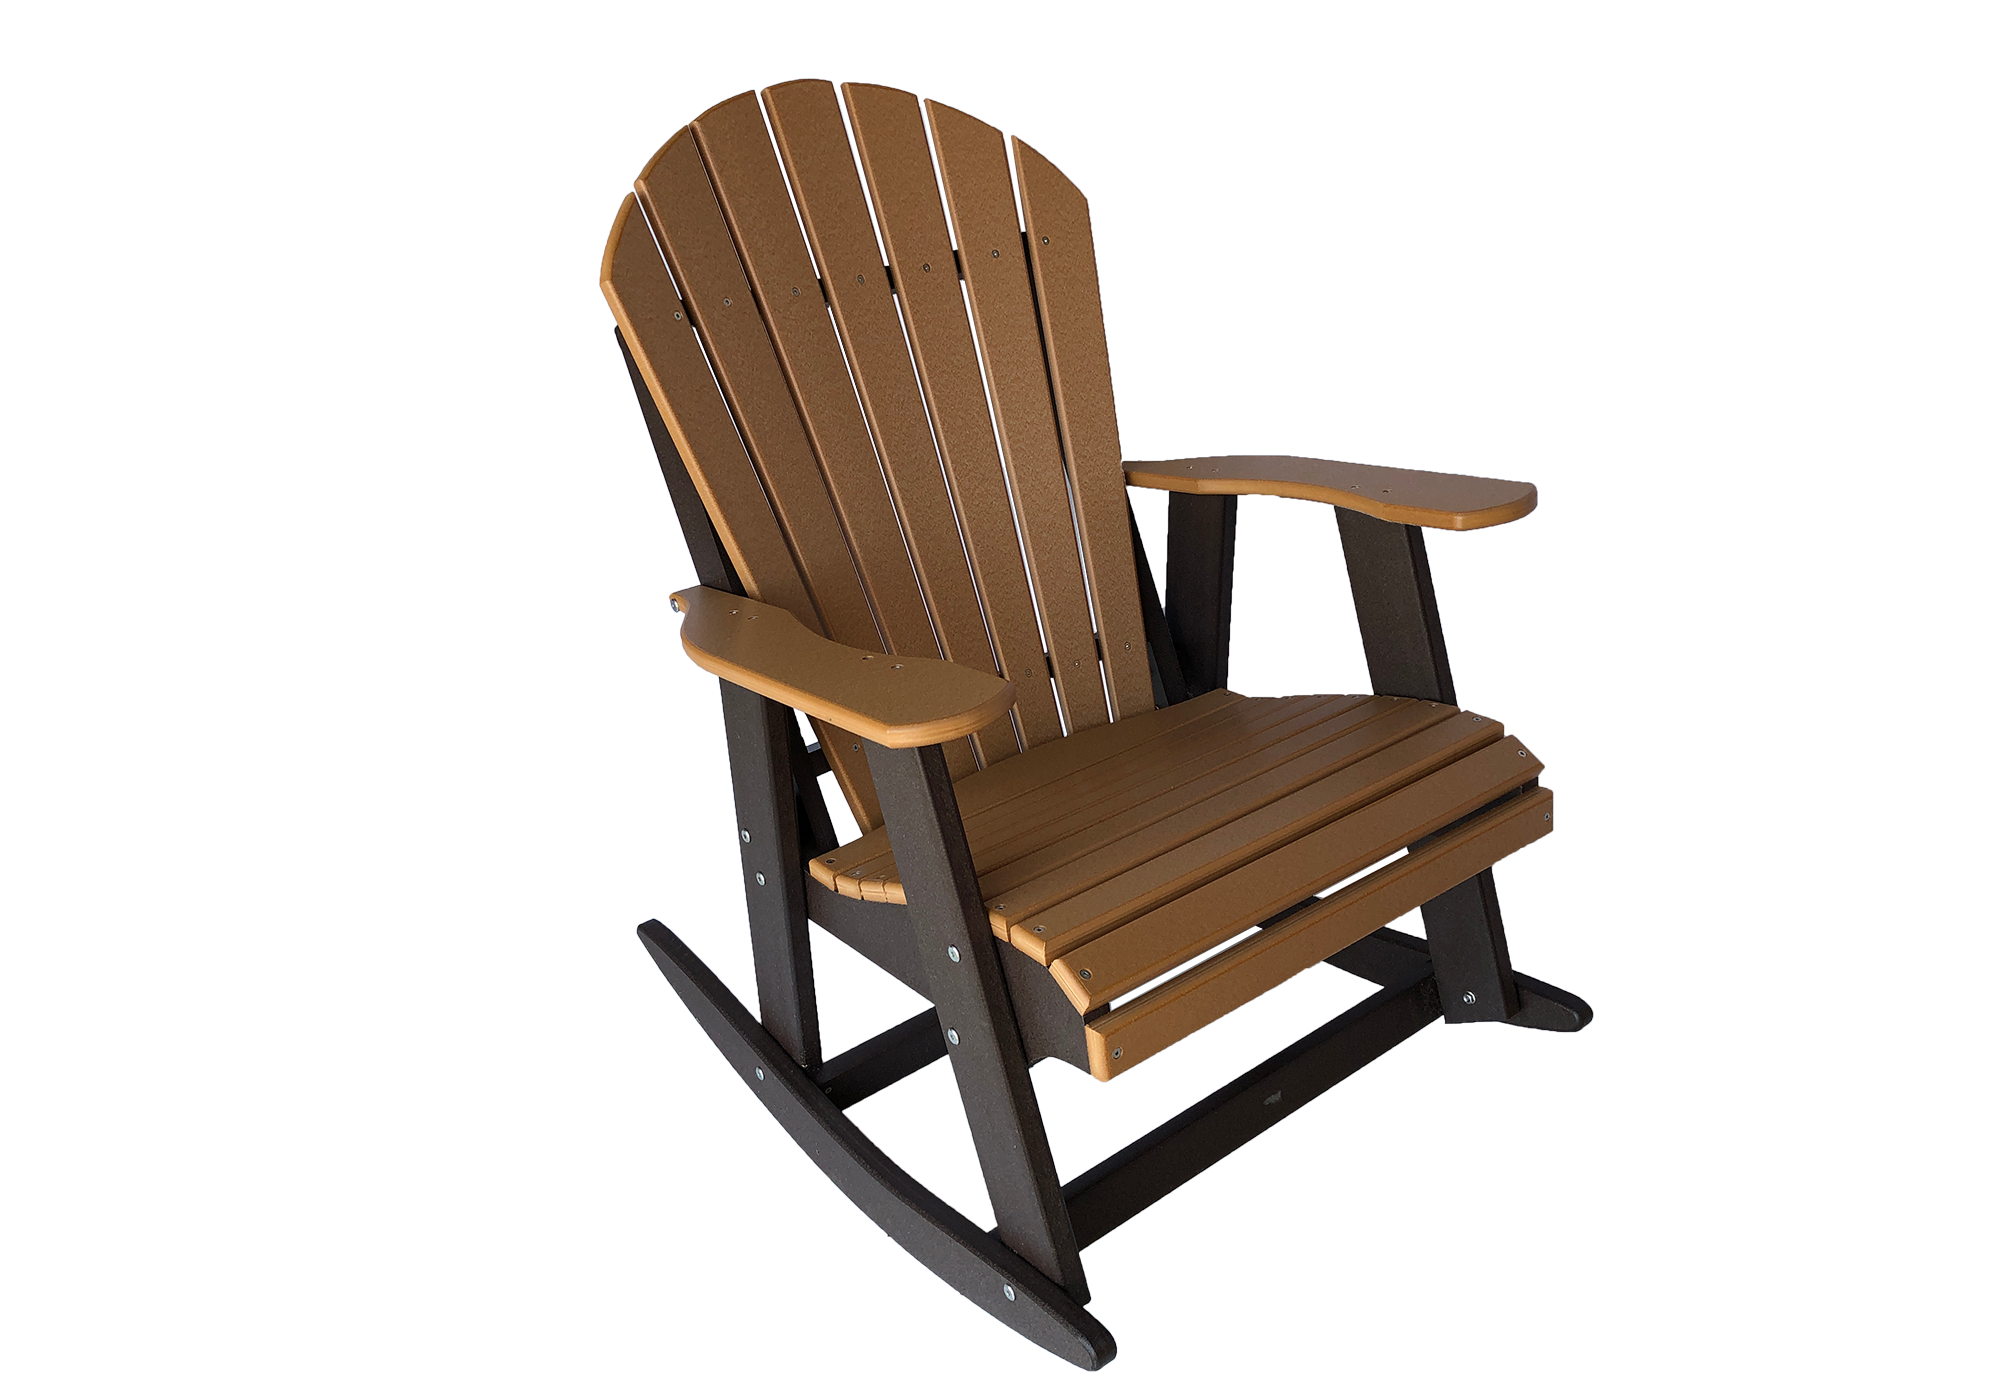 https://www.northwoodoutdoor.com/wp-content/uploads/poly-furniture/10-fanback-rocking-chair-outdoor-patio-furniture.png